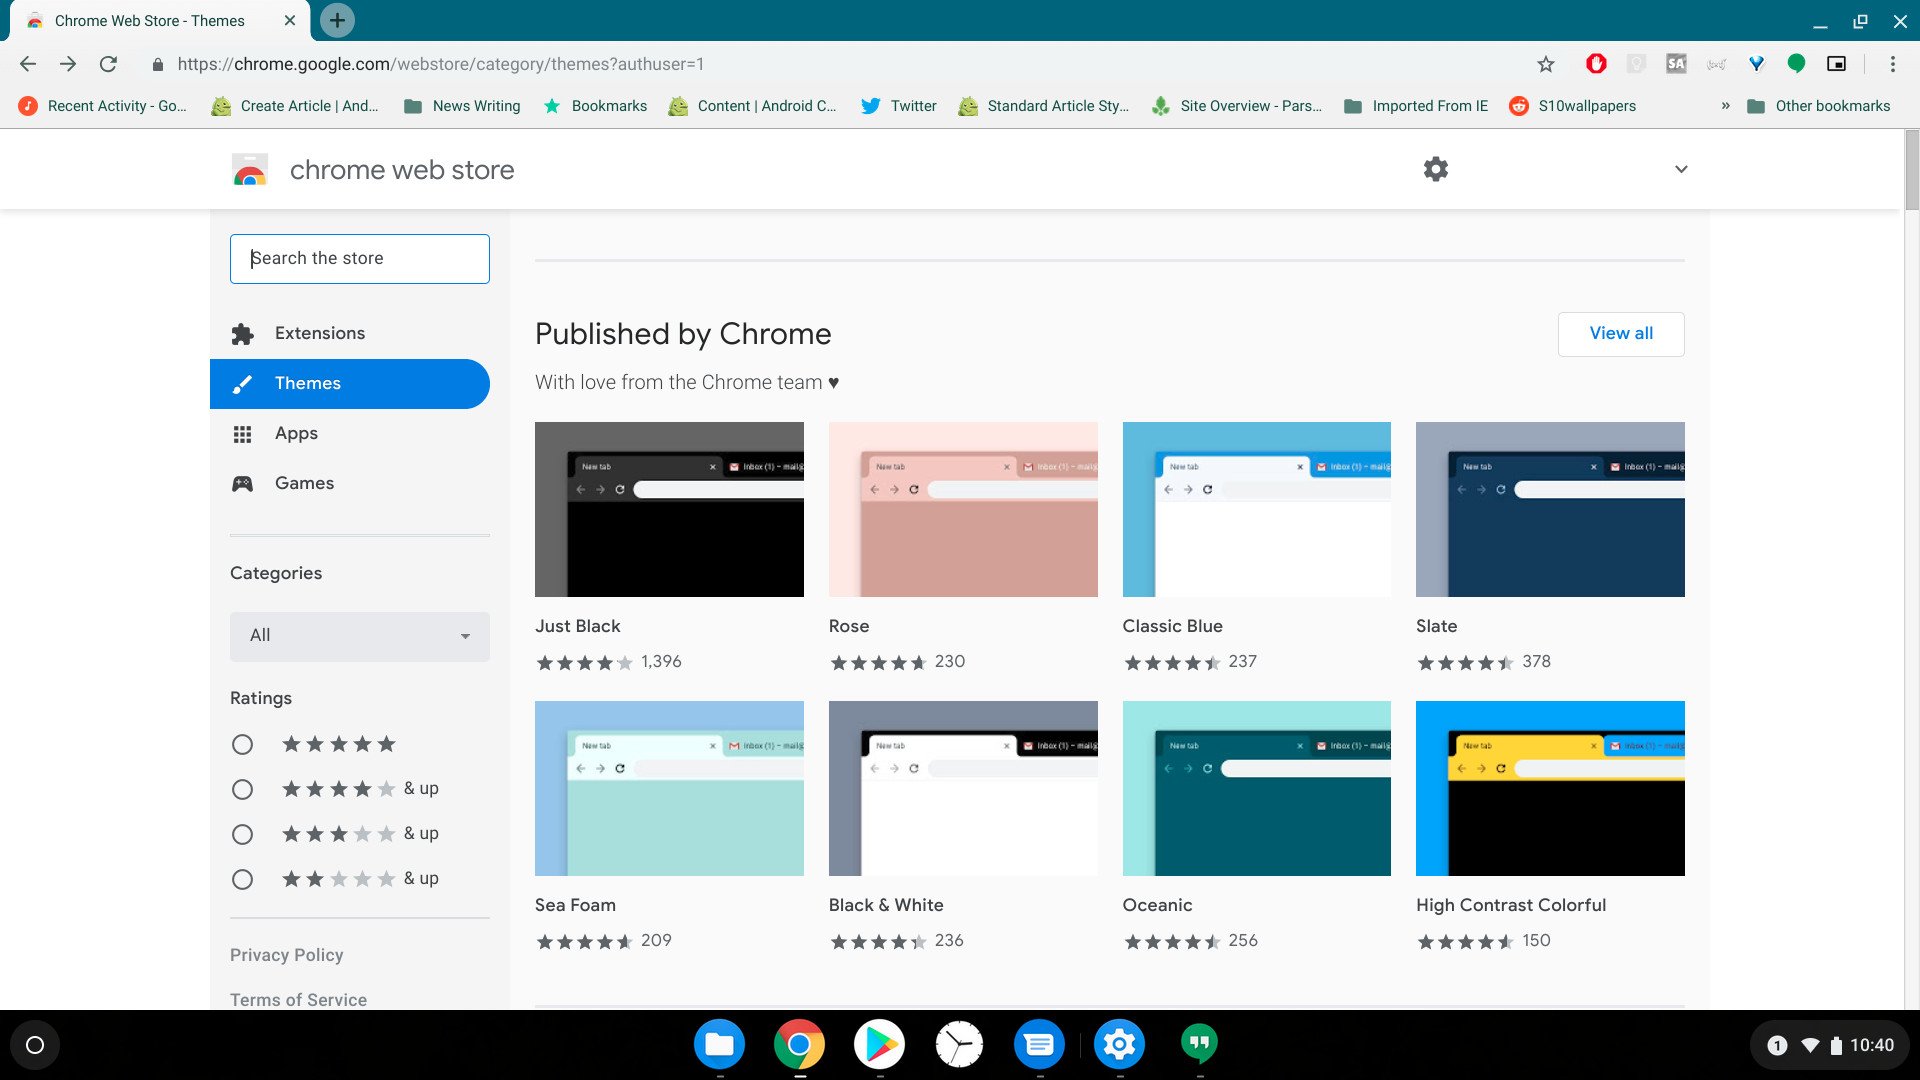 Welcome to Chrome Web Store